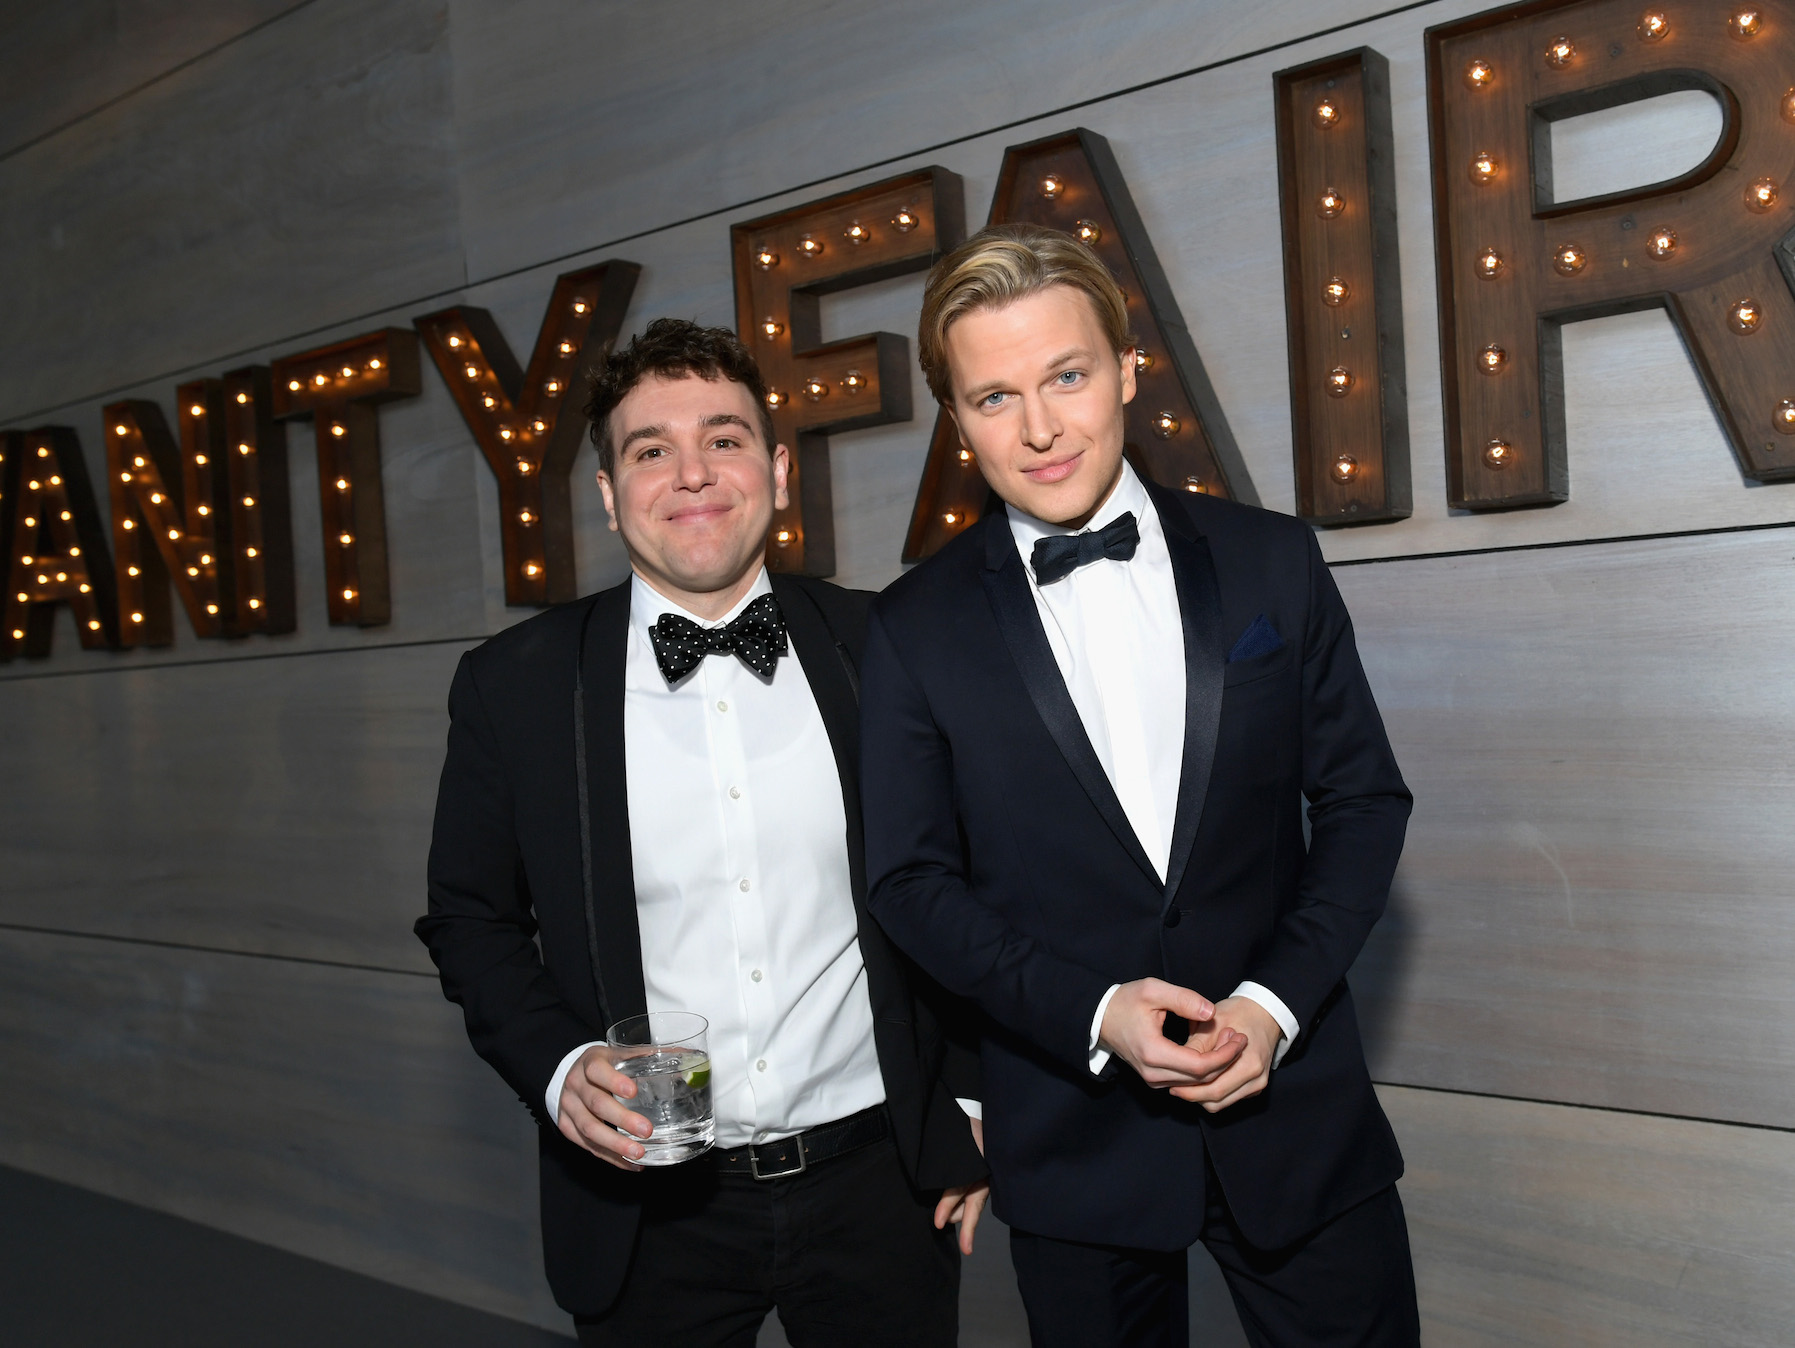 Jon Lovett and Ronan Farrow in suits standing in front of a Vanity Fair sign